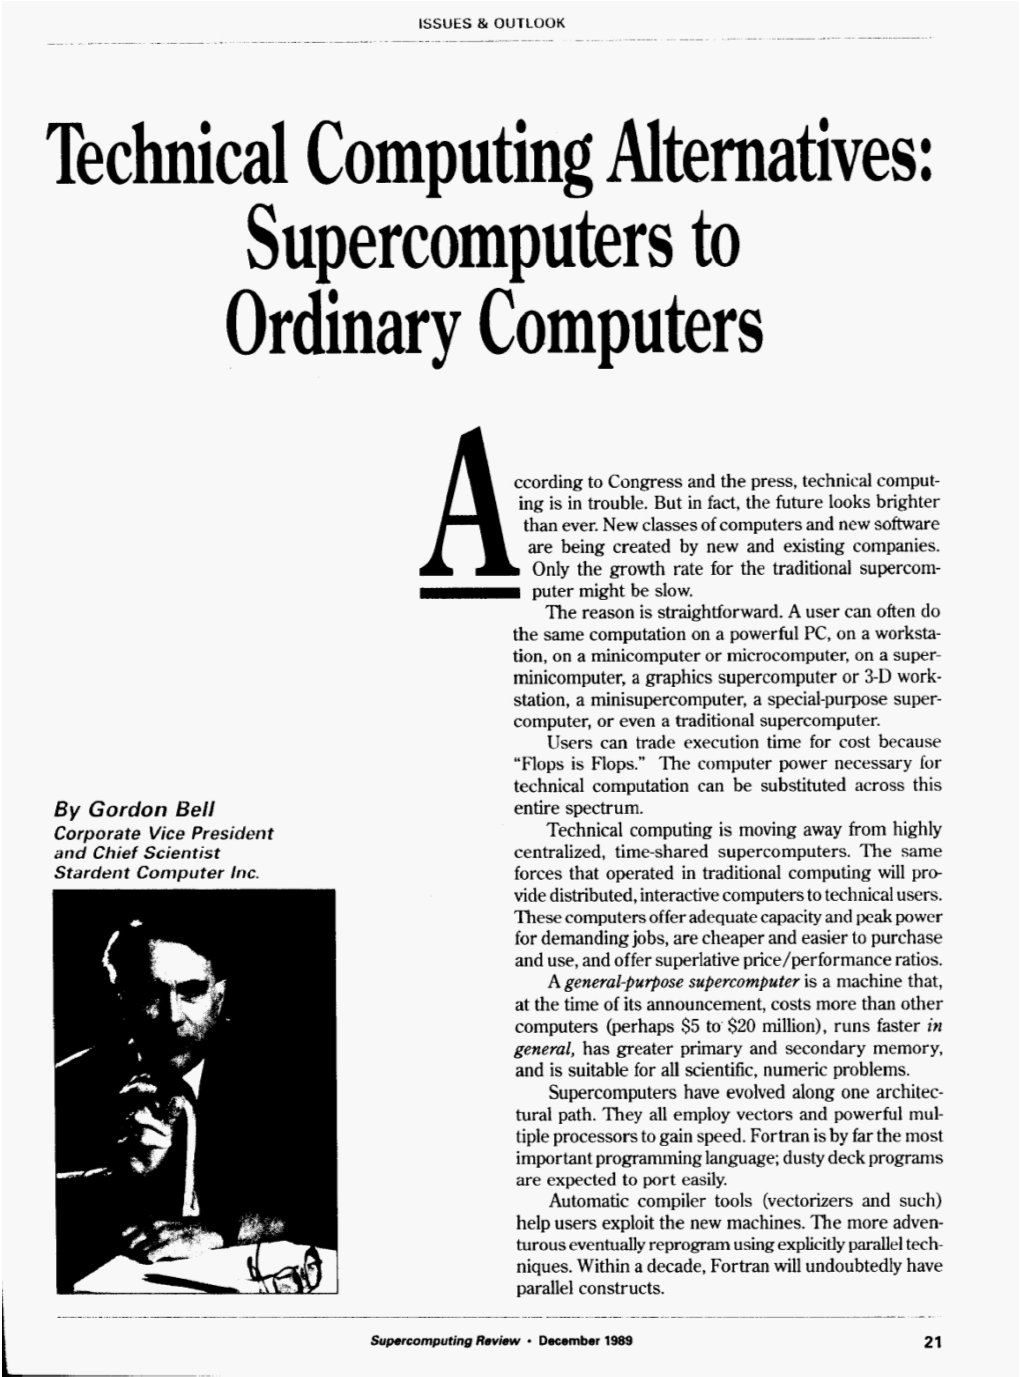 Technical Computing Alternatives: Supercomputers to Ordinary Computers